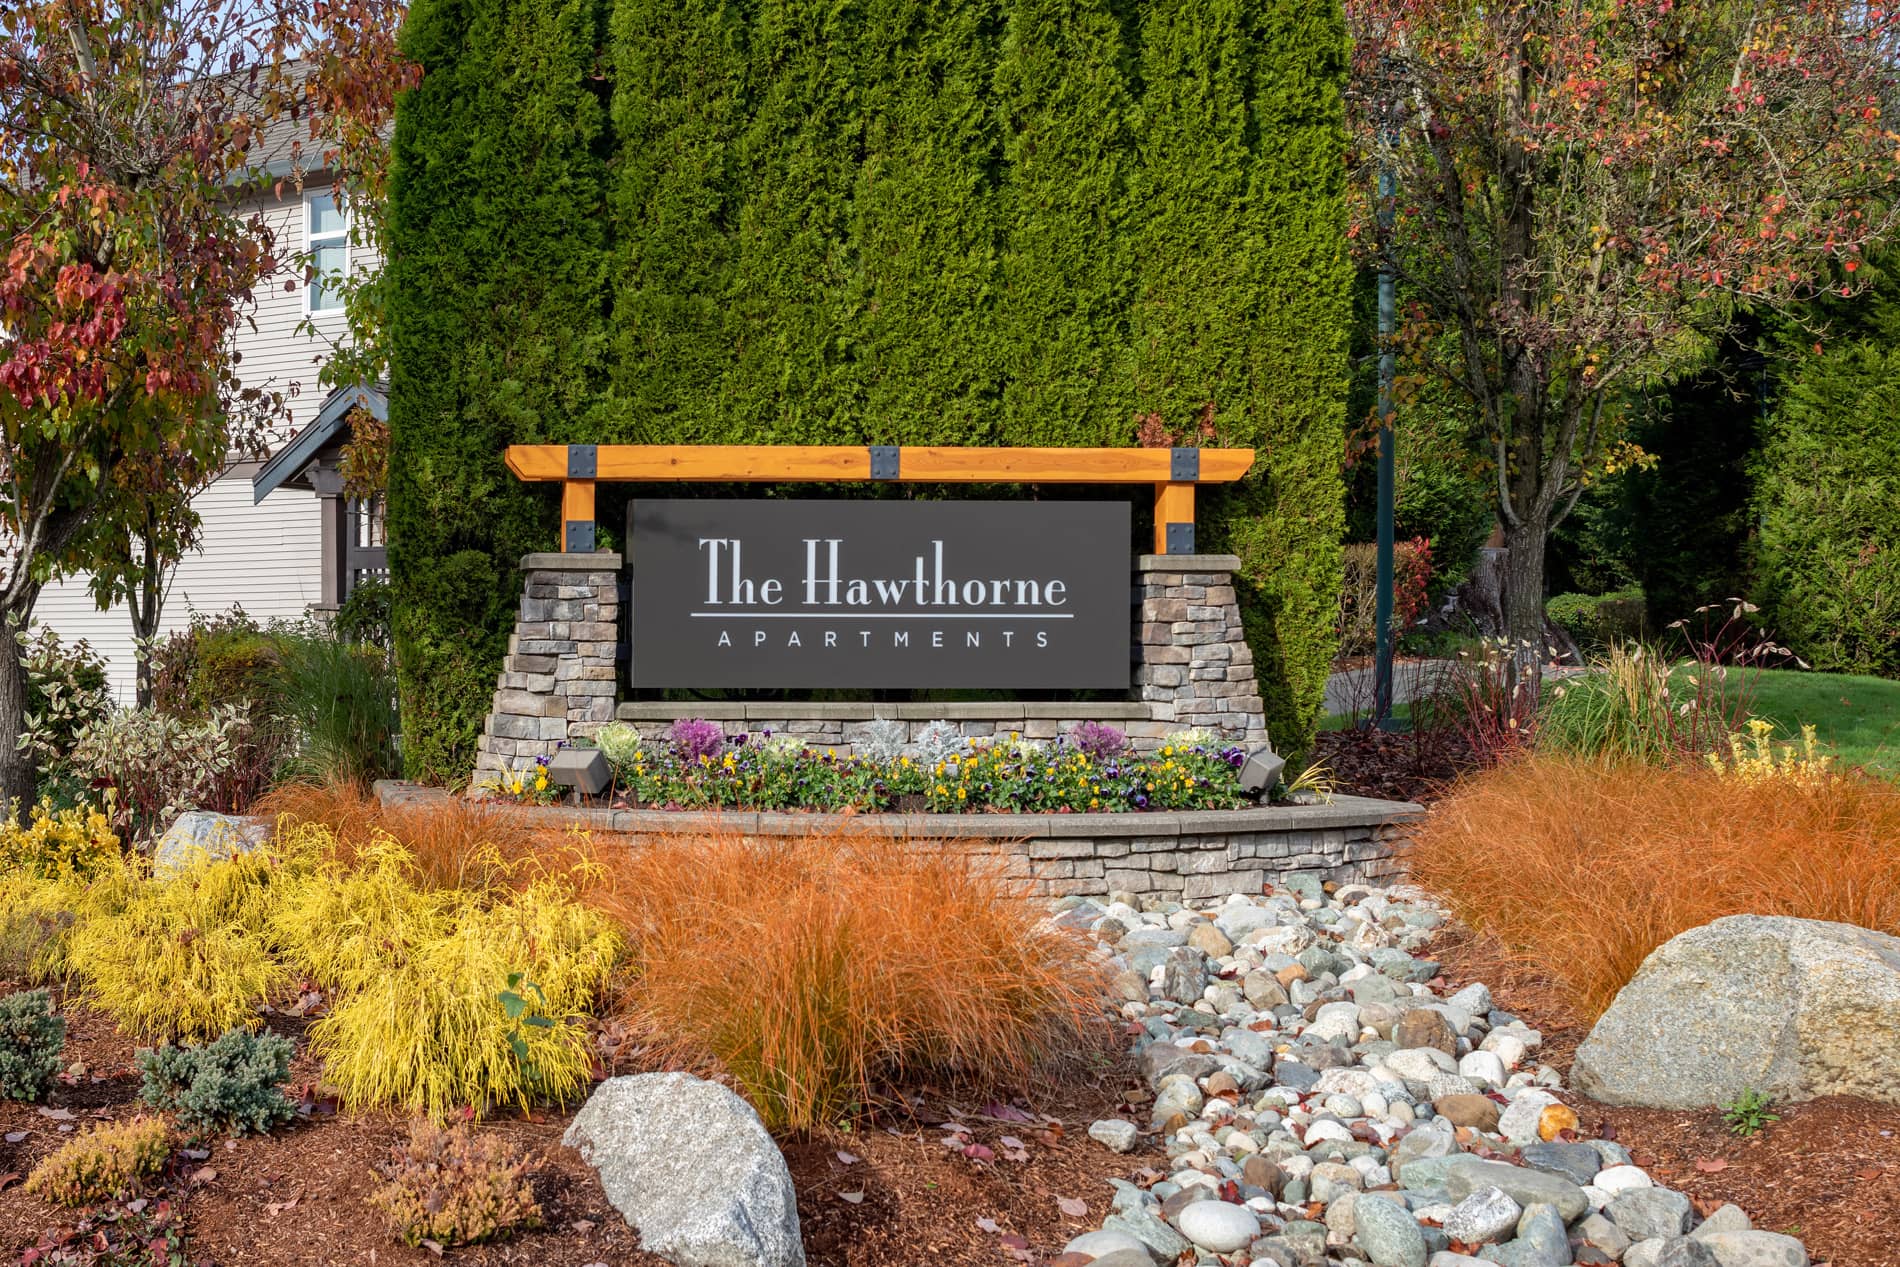 The Hawthorne Apartments Sign